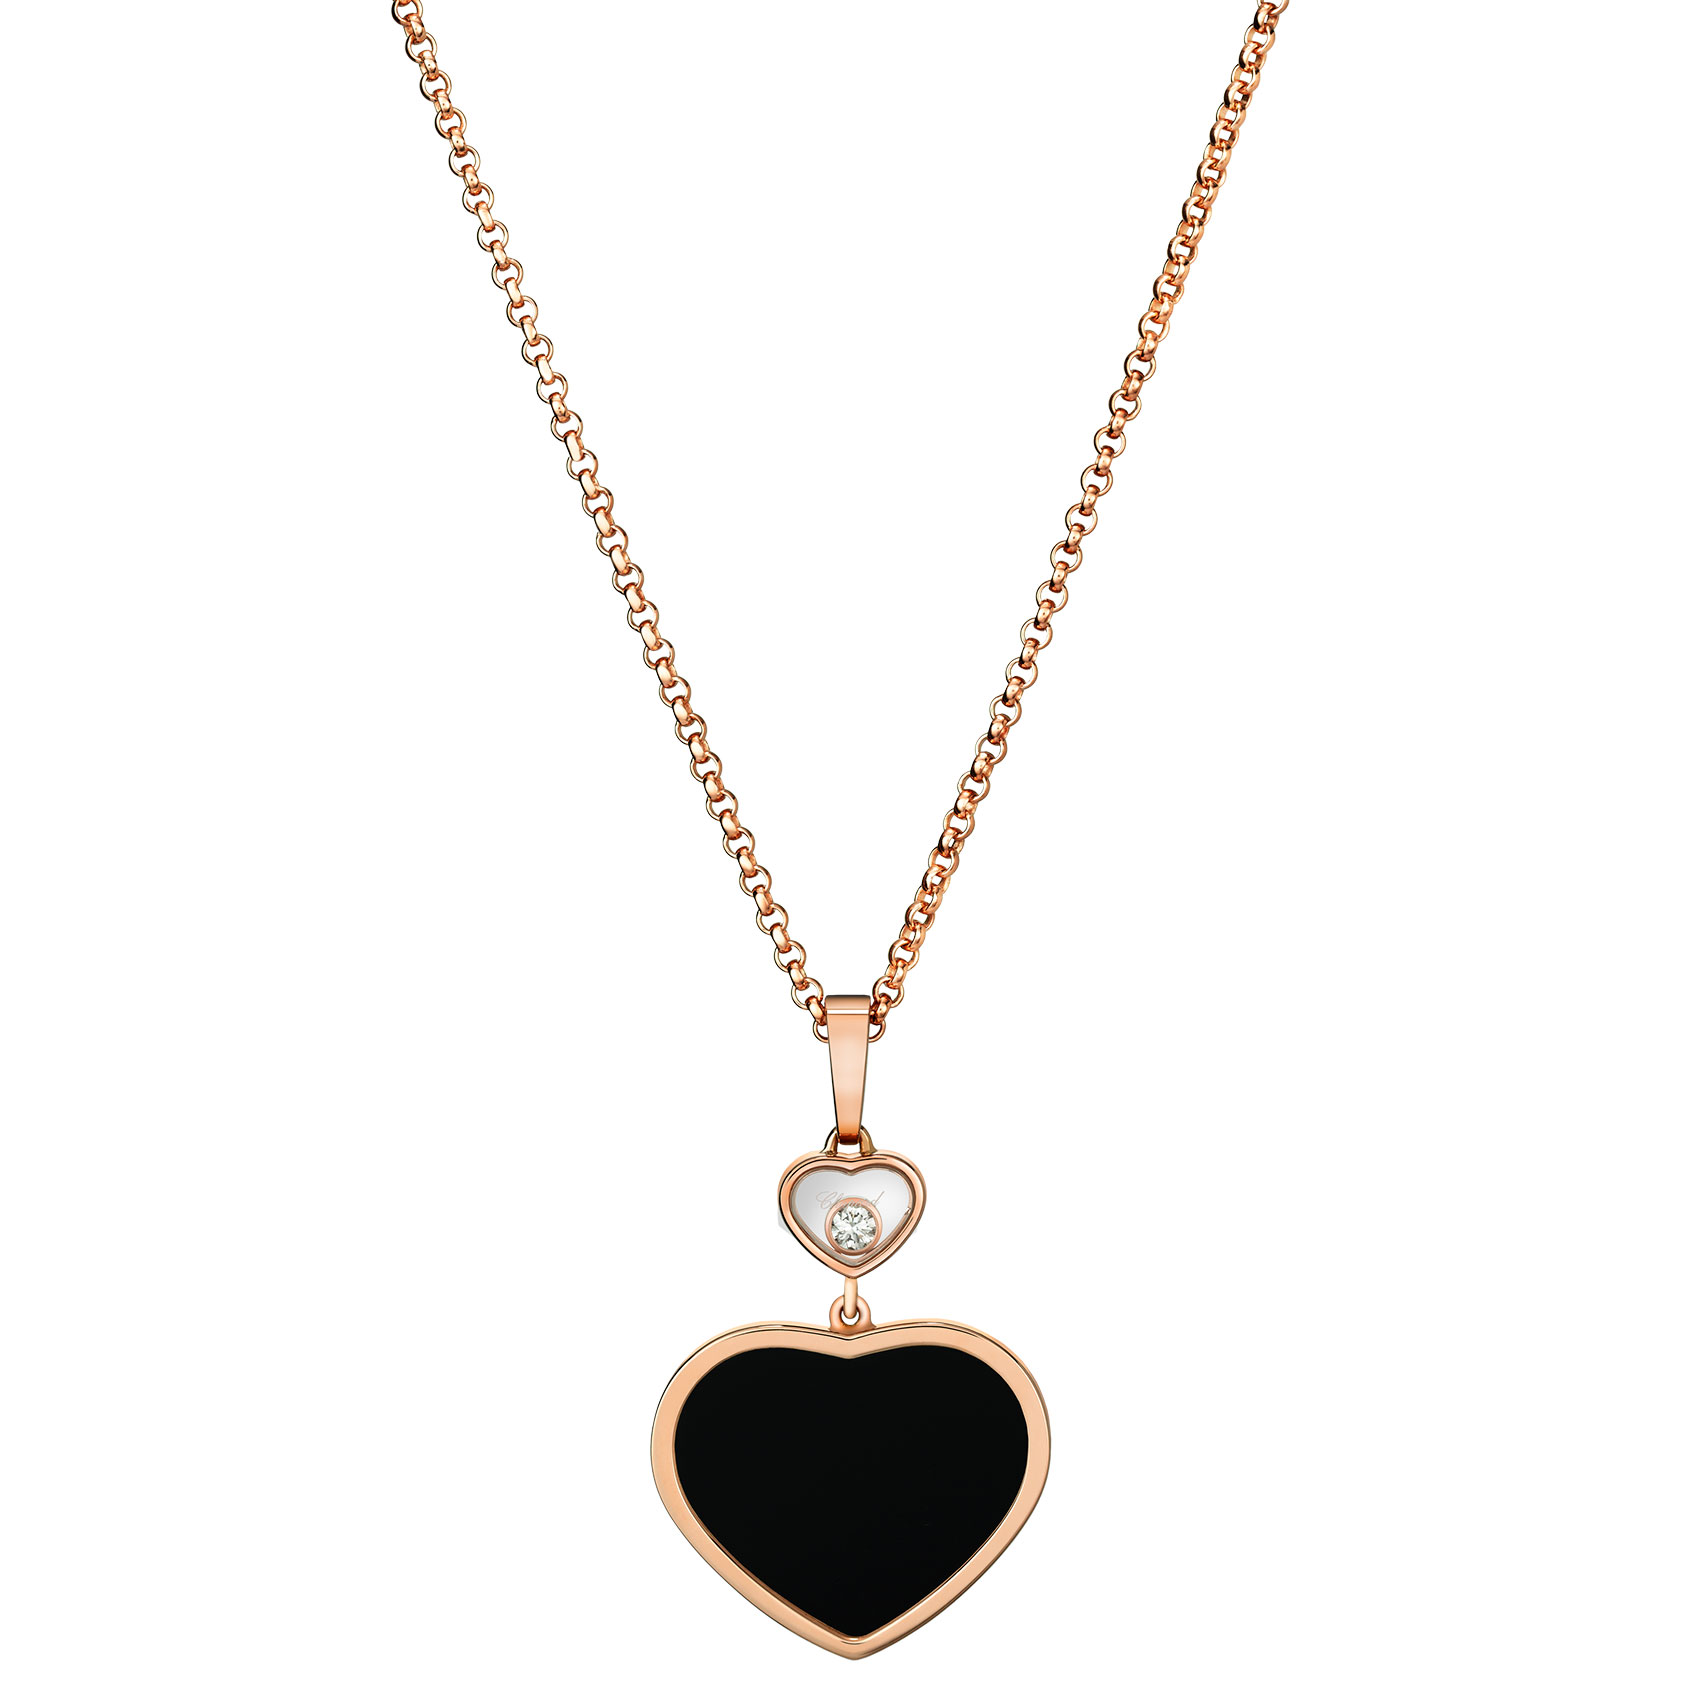 Gifts for the Bride: Happy Hearts Onyx Pendant 797482-5201